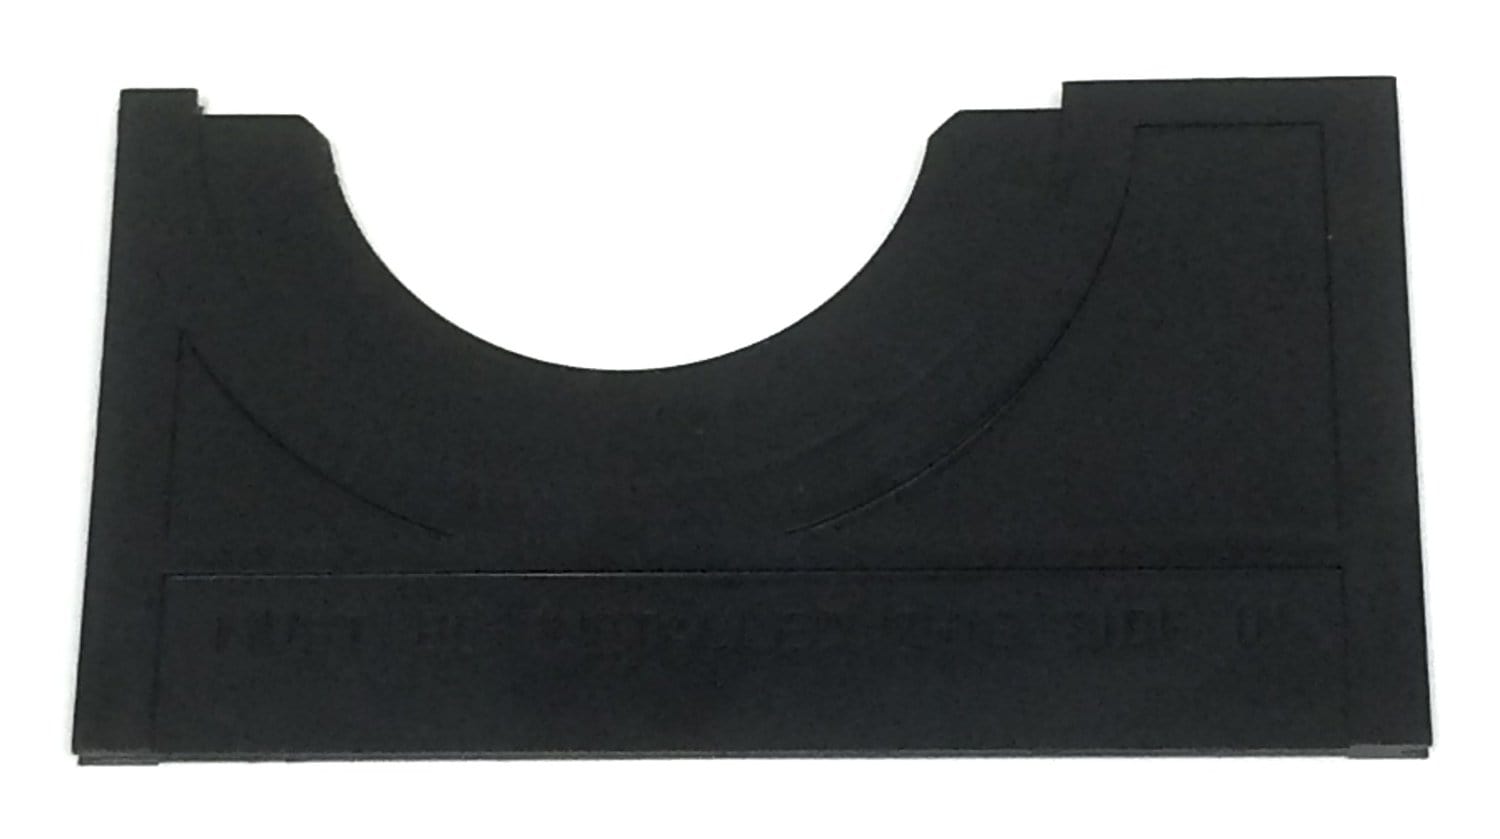 Atwood 37411 Hydroflame Furnace Side Plate